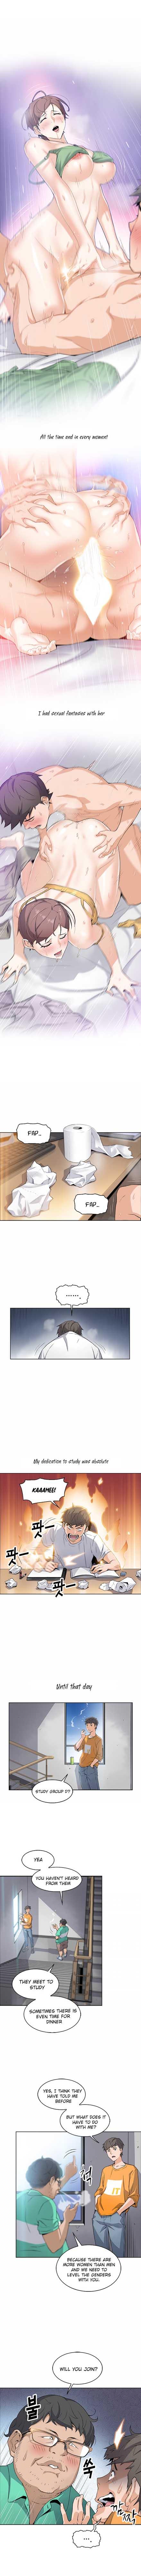 All Housekeeper [Neck Pillow, Paper] Ch.49/49 [English] [Manhwa PDF] Completed Hot Blow Jobs - Page 9